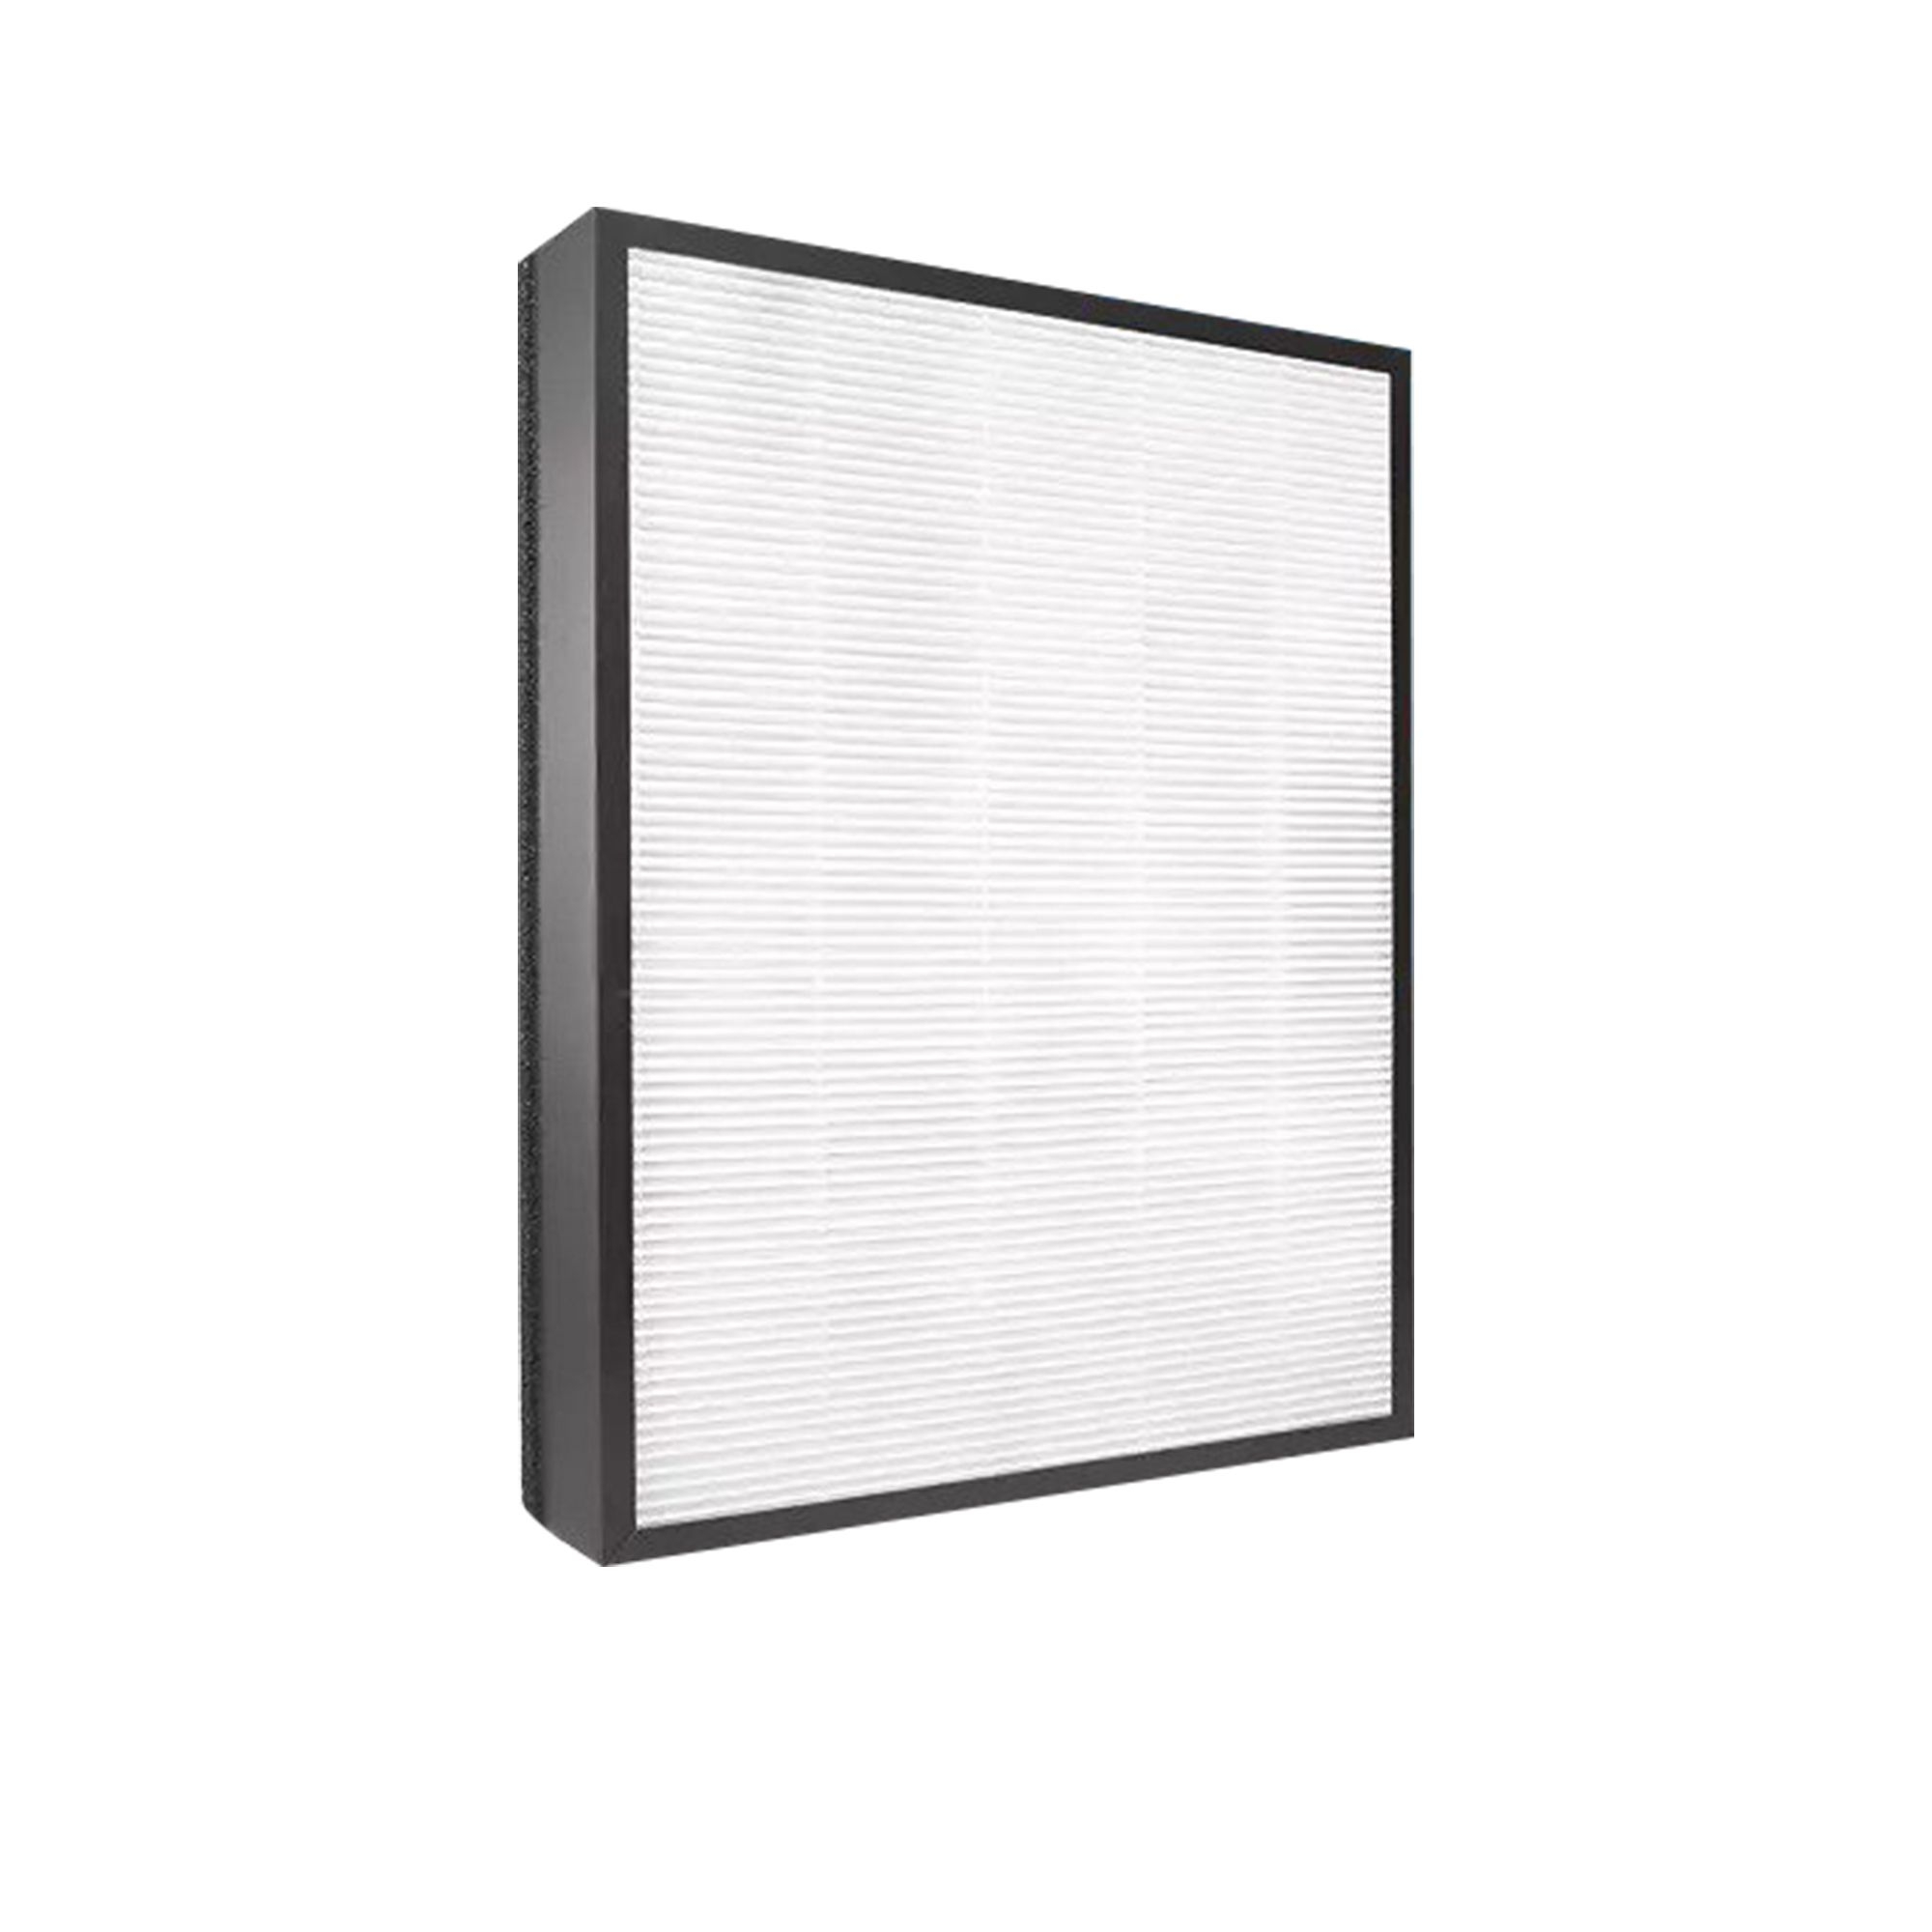 Philips NanoProtect 2000 Series HEPA Filter Replacement for AC2887/70 Image 1